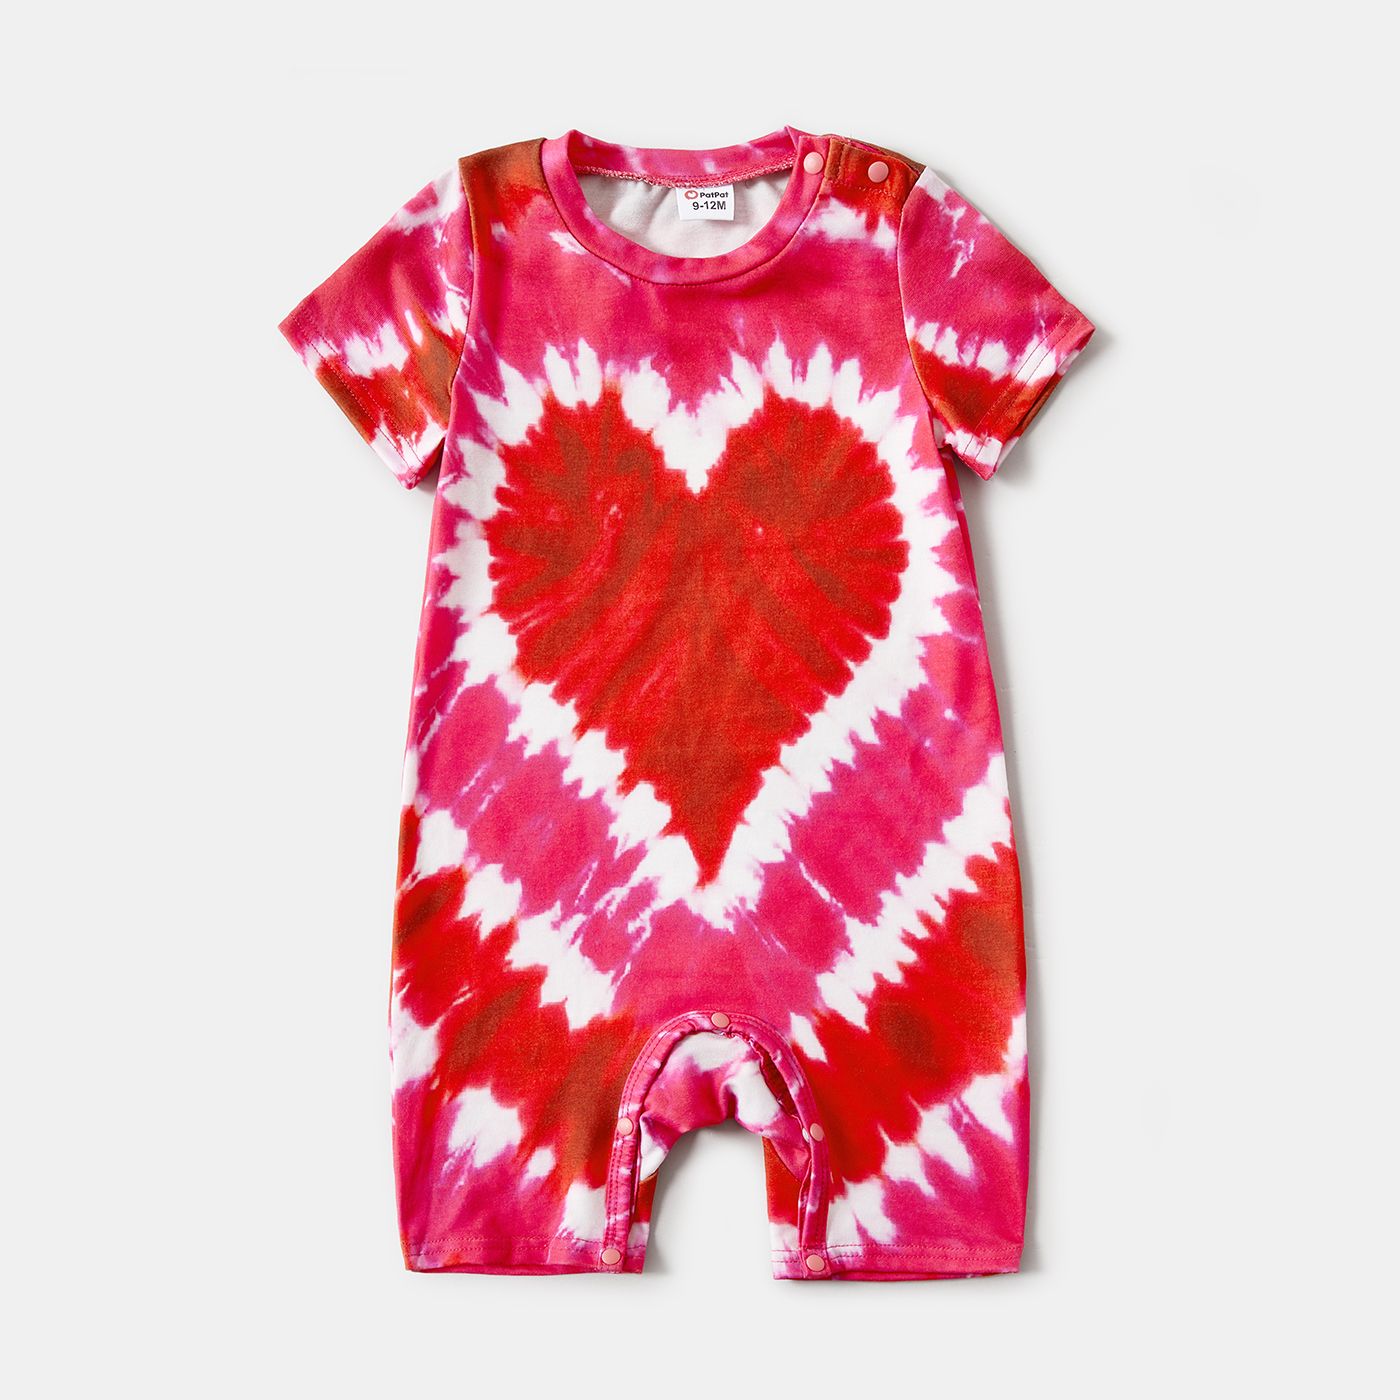 Family Matching Short-sleeve Tie Dye Heart Graphic T-shirts